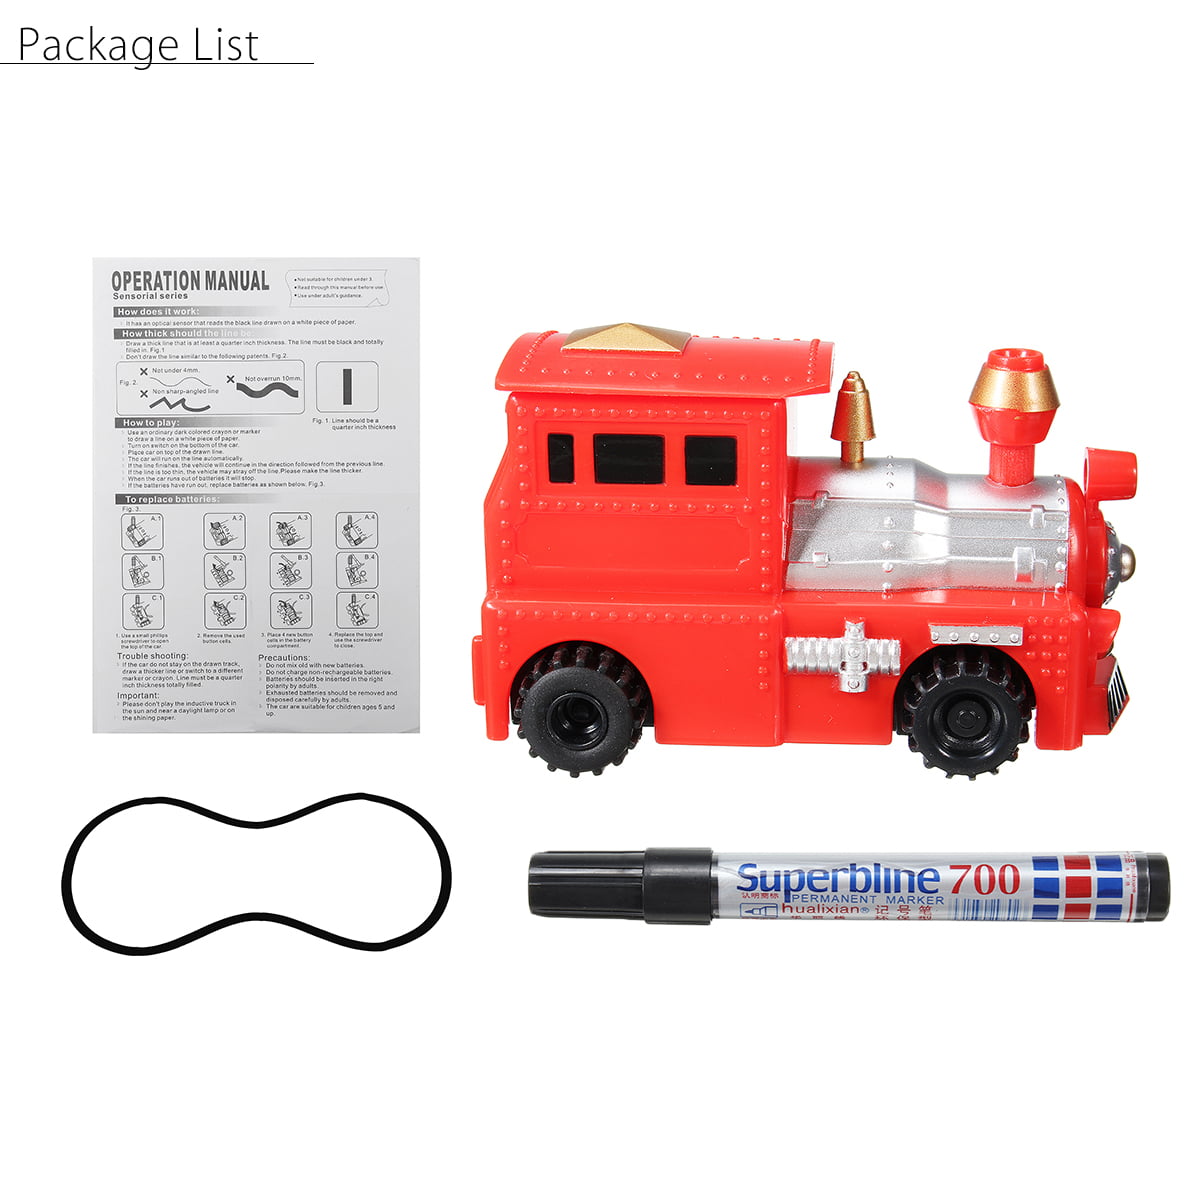 A sunnymi Magic Scribing Inductive Engineering vehicles Follows Black Line Magic Toy Car for Kids